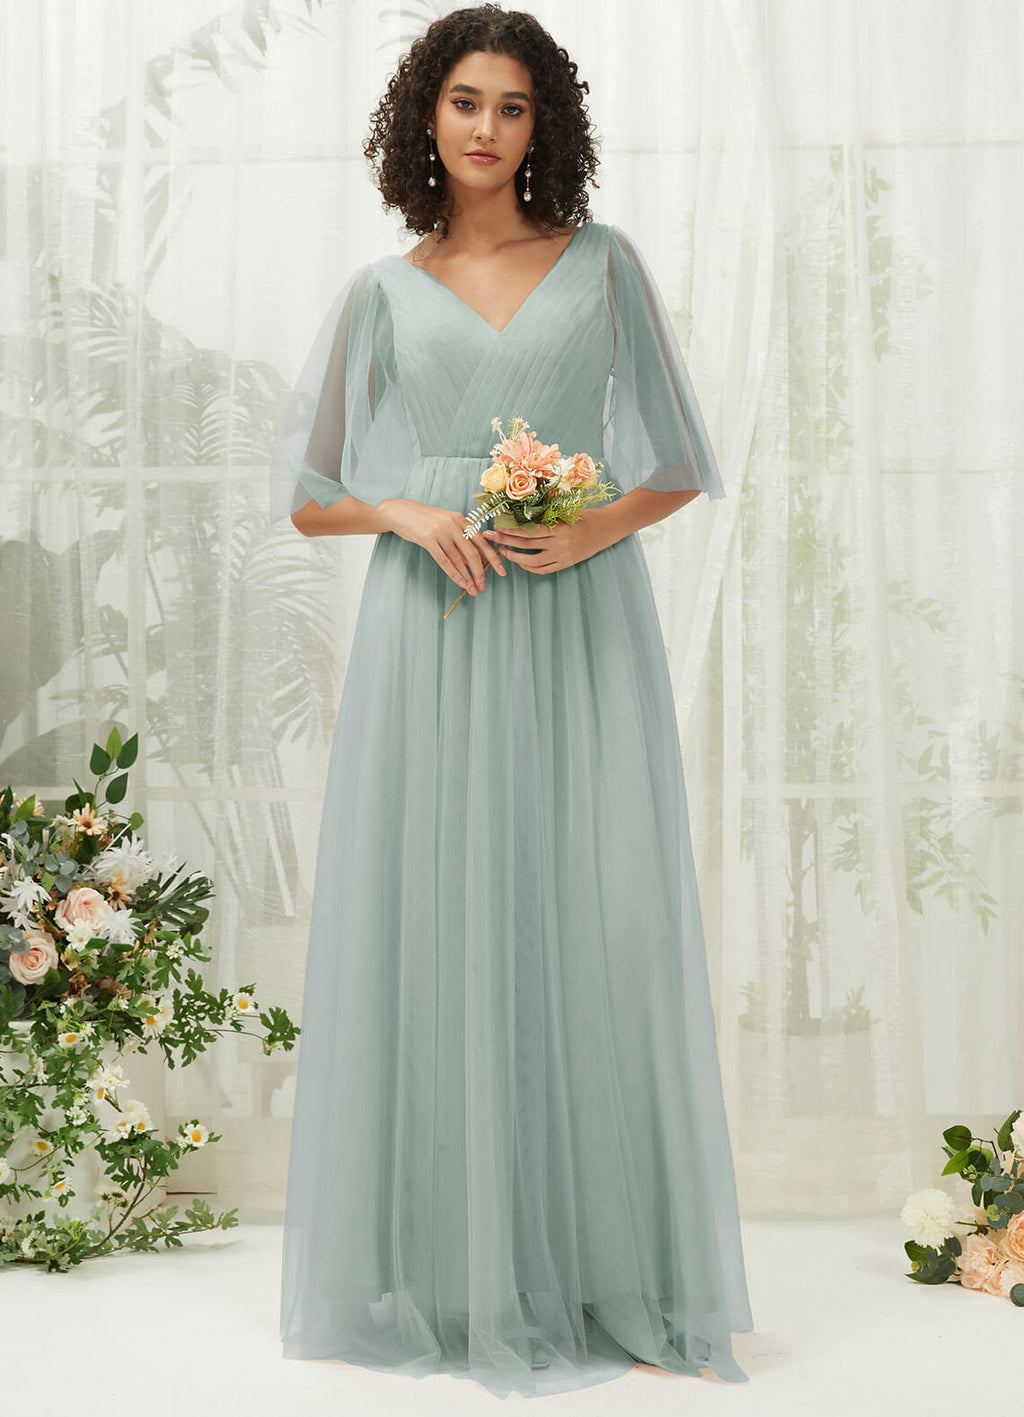 NZ Bridal Sage Green Tulle Maxi Backless bridesmaid dresses With Pocket R1026 Thea a